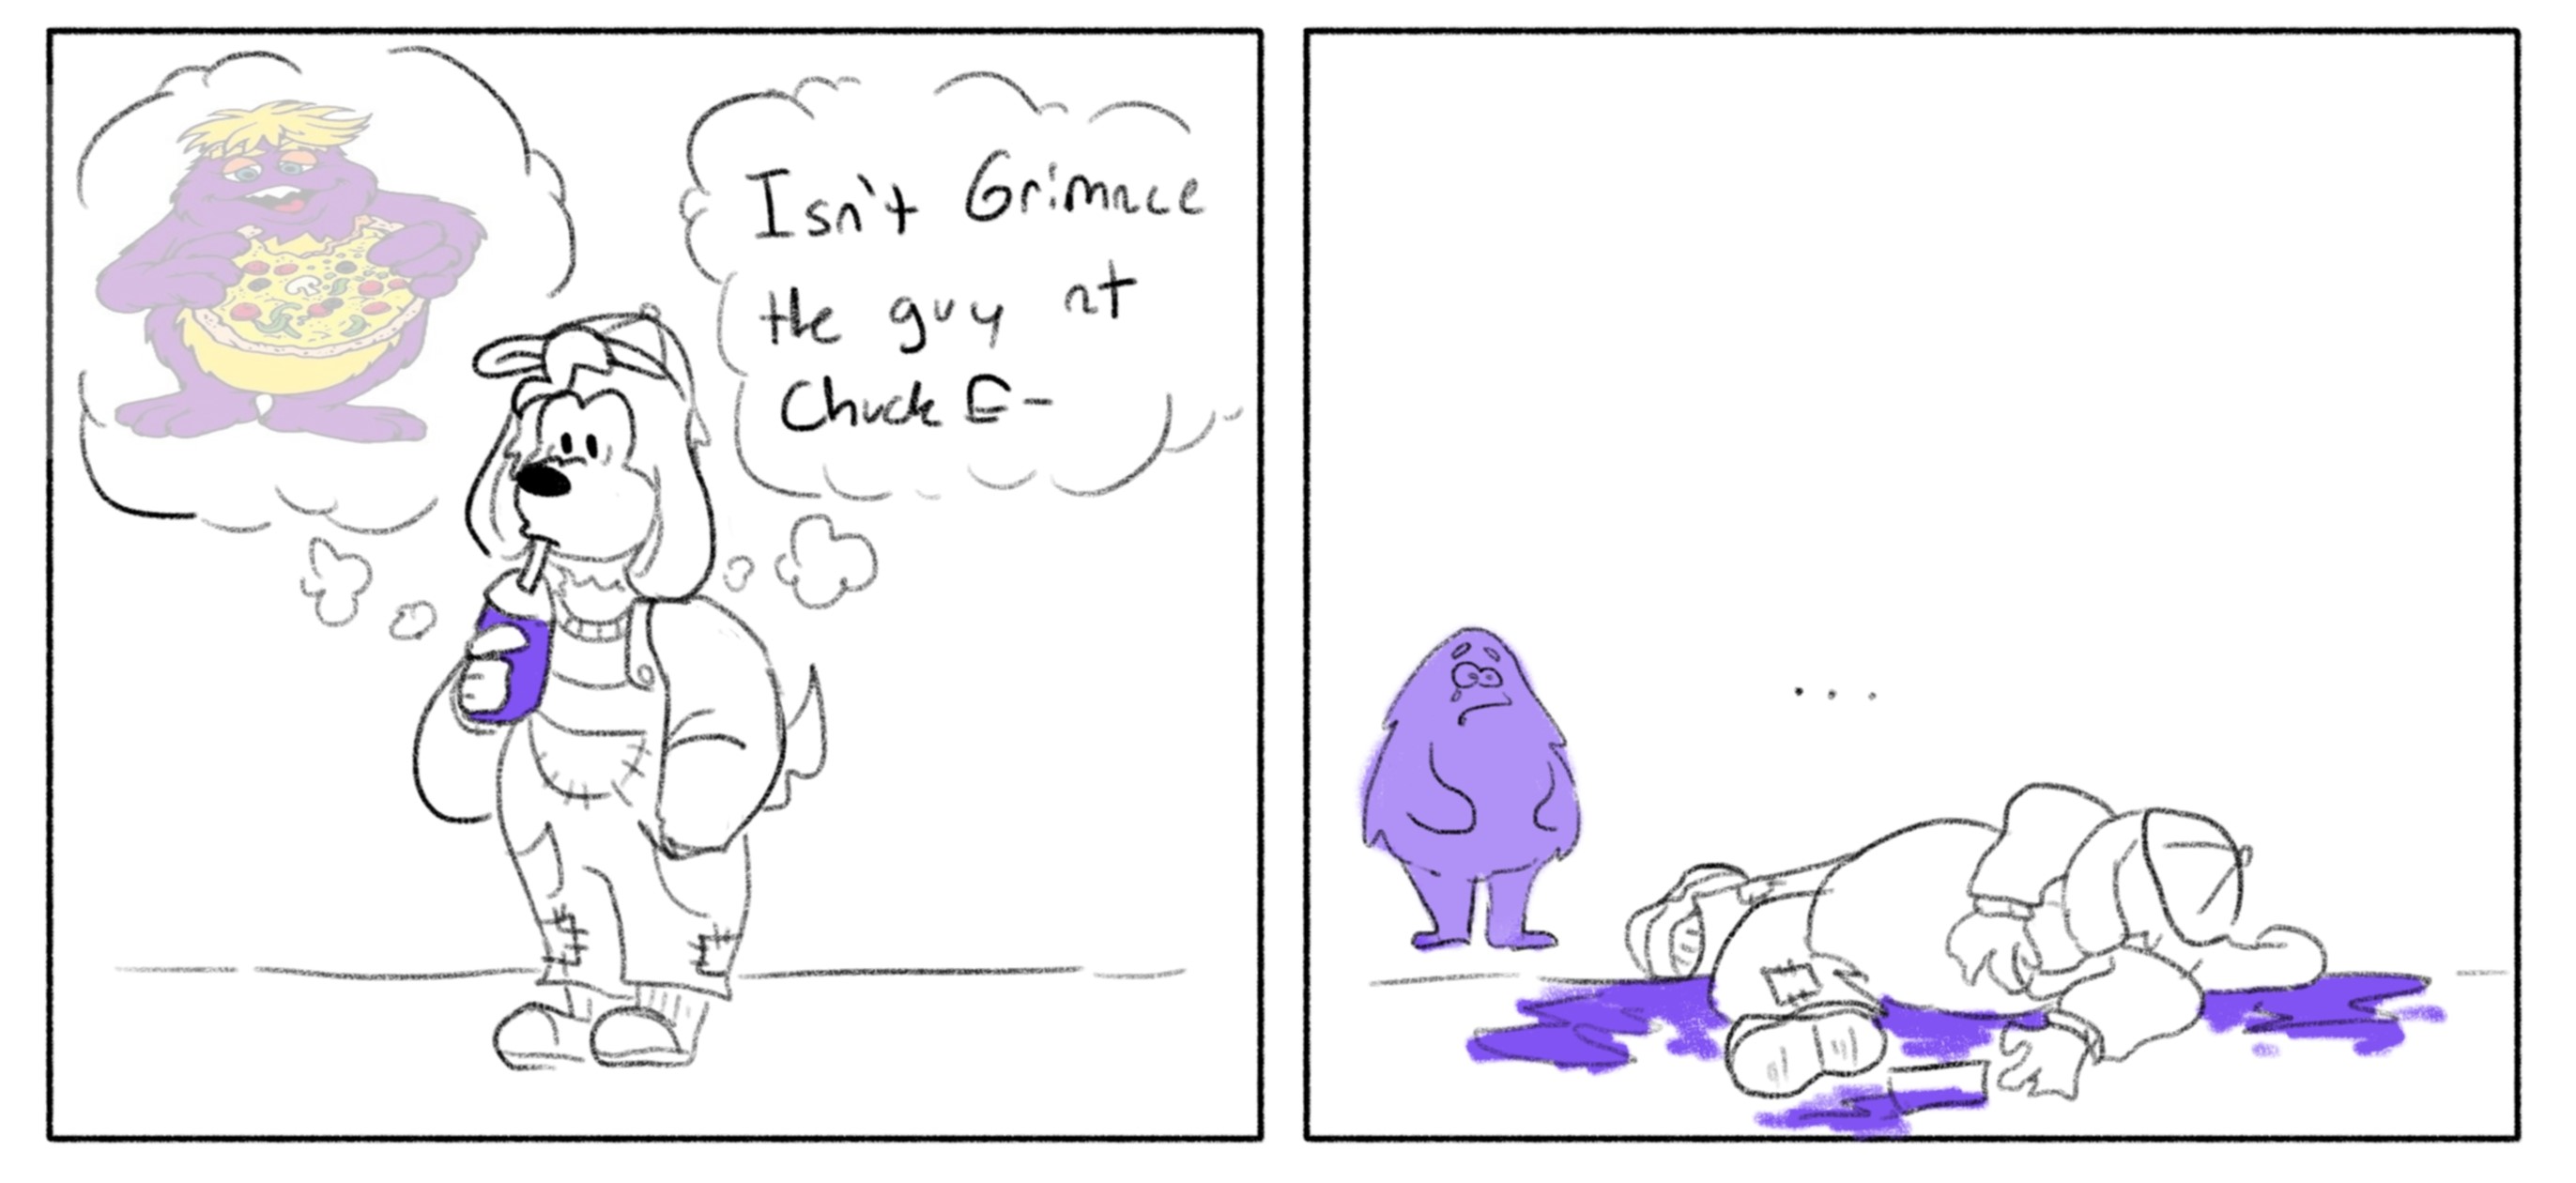 A comic depicting Dook in his nrae outfit drinking a grimace shake. A thought bubble above his head says 'Isn't Grimace the guy at Chuck E-' and and image of Mr. Munch from Chuck E. Cheese. The next panel depicts him on the floor in the peter griffin death pose with a purple puddle of grimace shake beneath him. Grimace stares in horror.